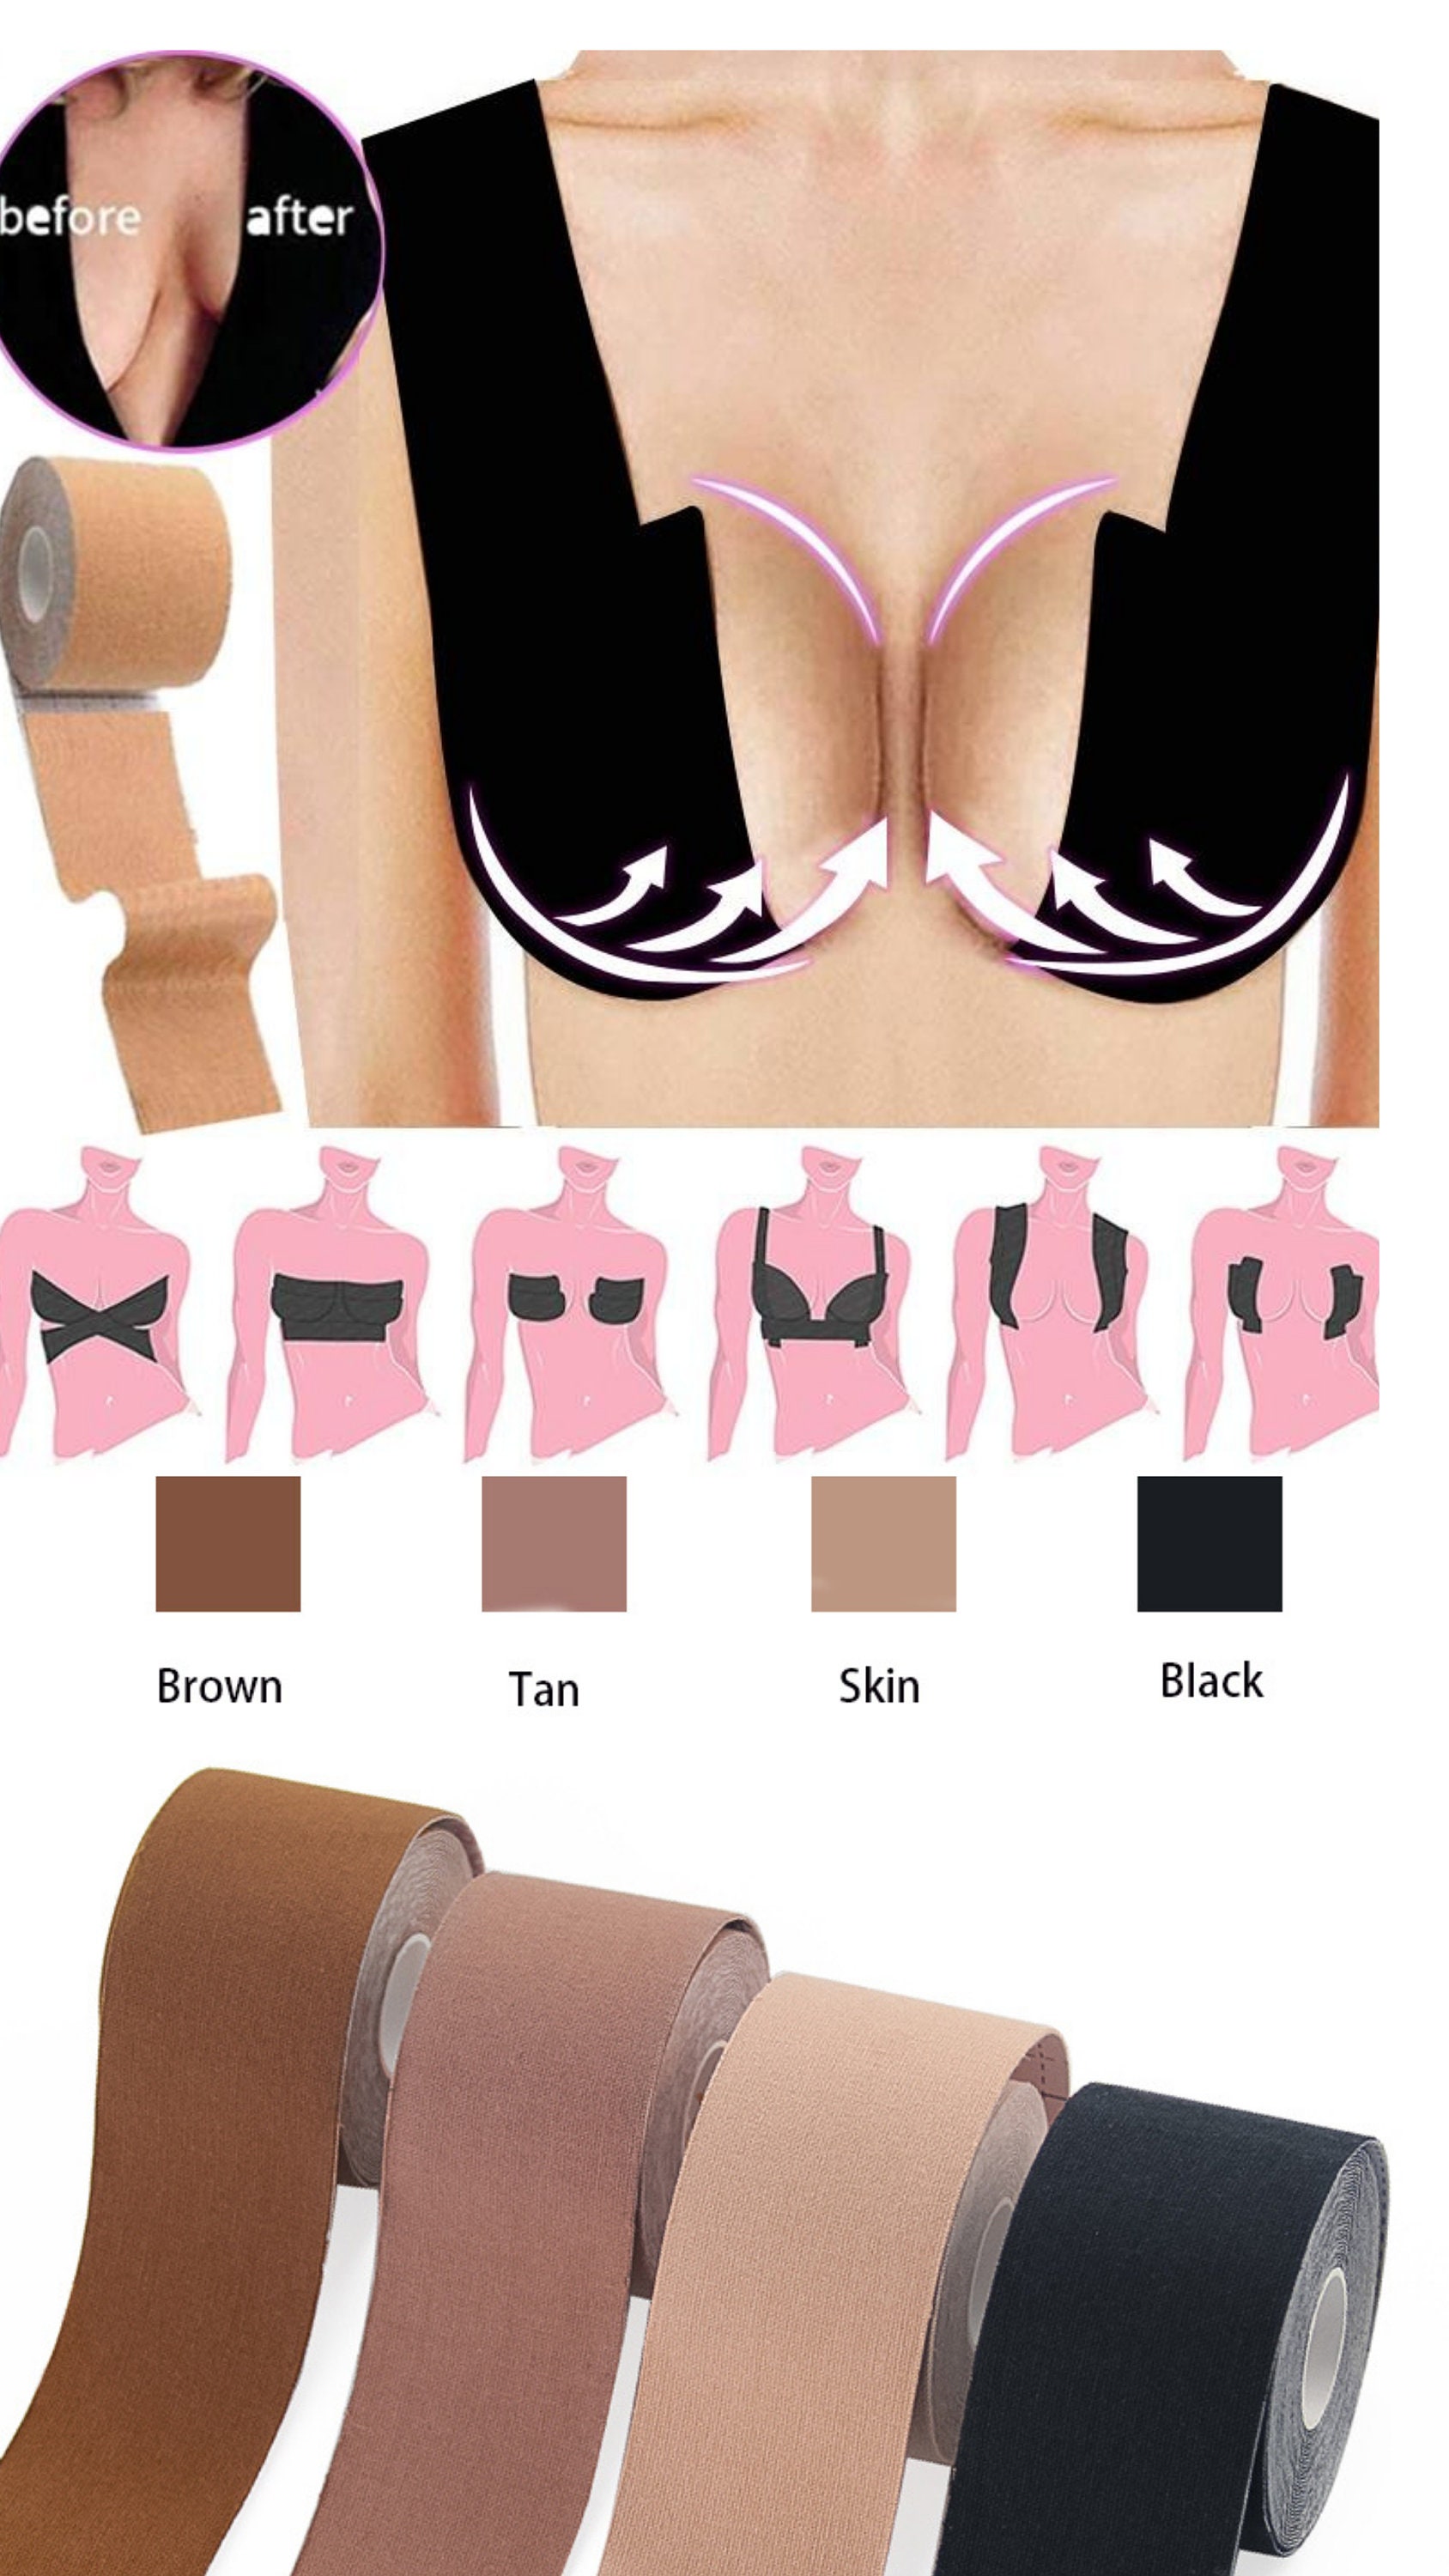 Breast Tape Body Tape Tape Method Lipo Tape Post Op Tape KT Tape Contouring  Tape After Surgery Tape 